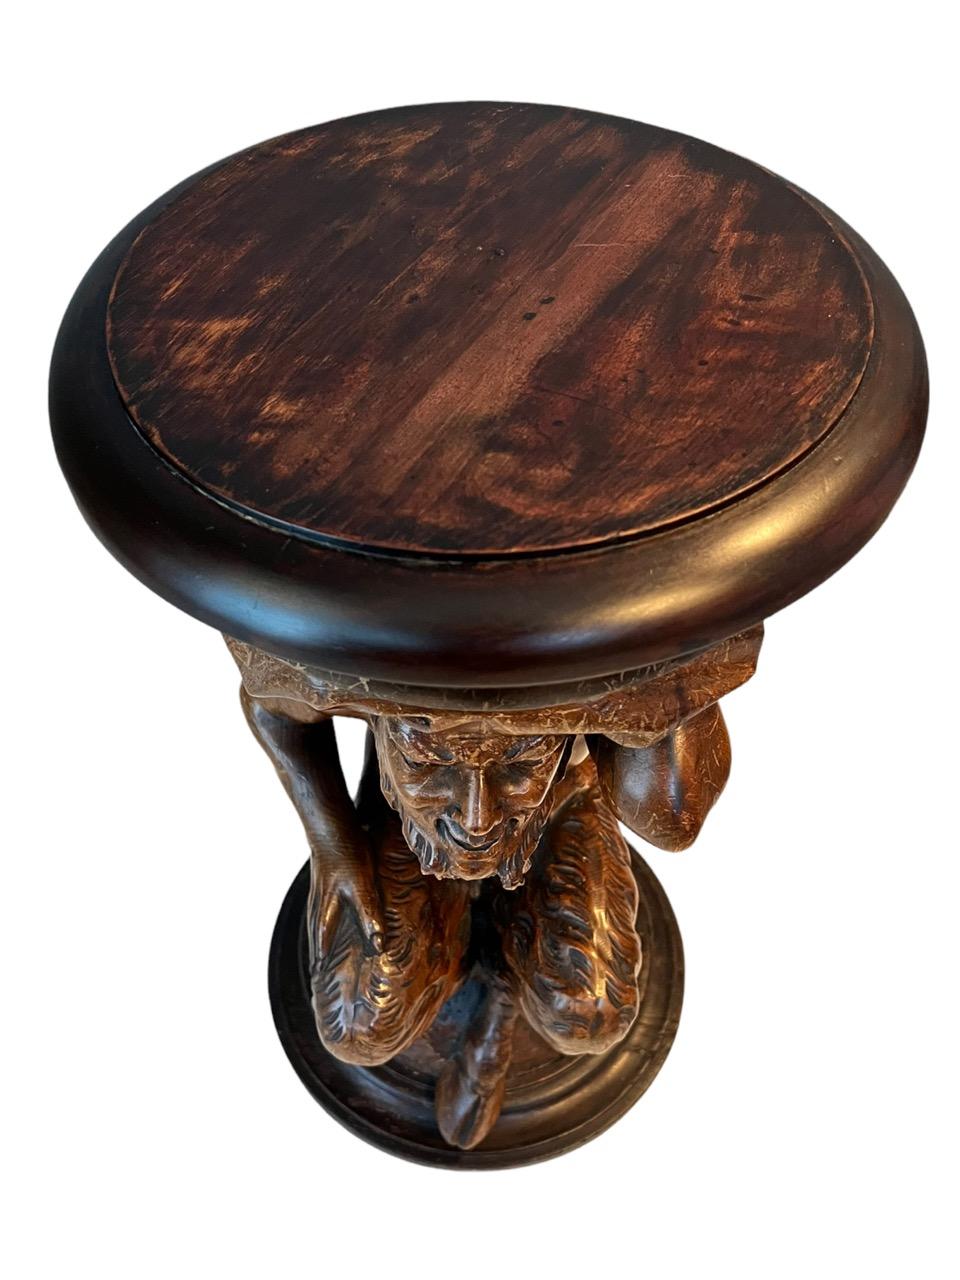 19th Century Carved Walnut Piano Stool, Black Forest  For Sale 1